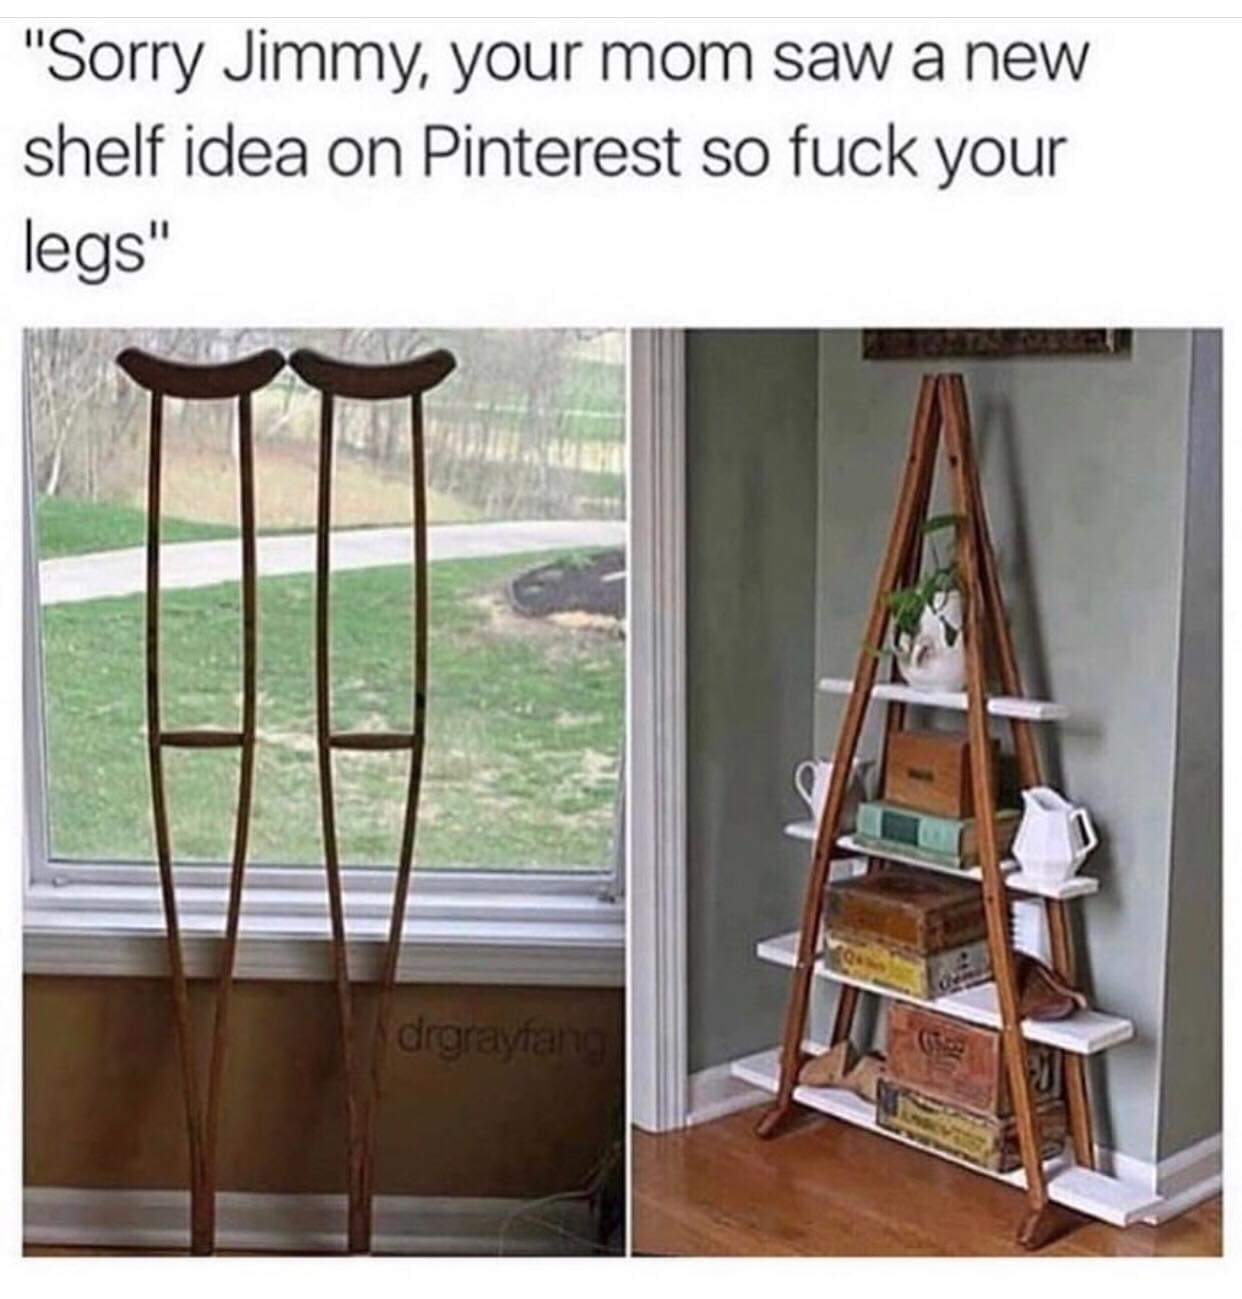 repurposed furniture ideas - "Sorry Jimmy, your mom saw a new shelf idea on Pinterest so fuck your legs" drgraytang